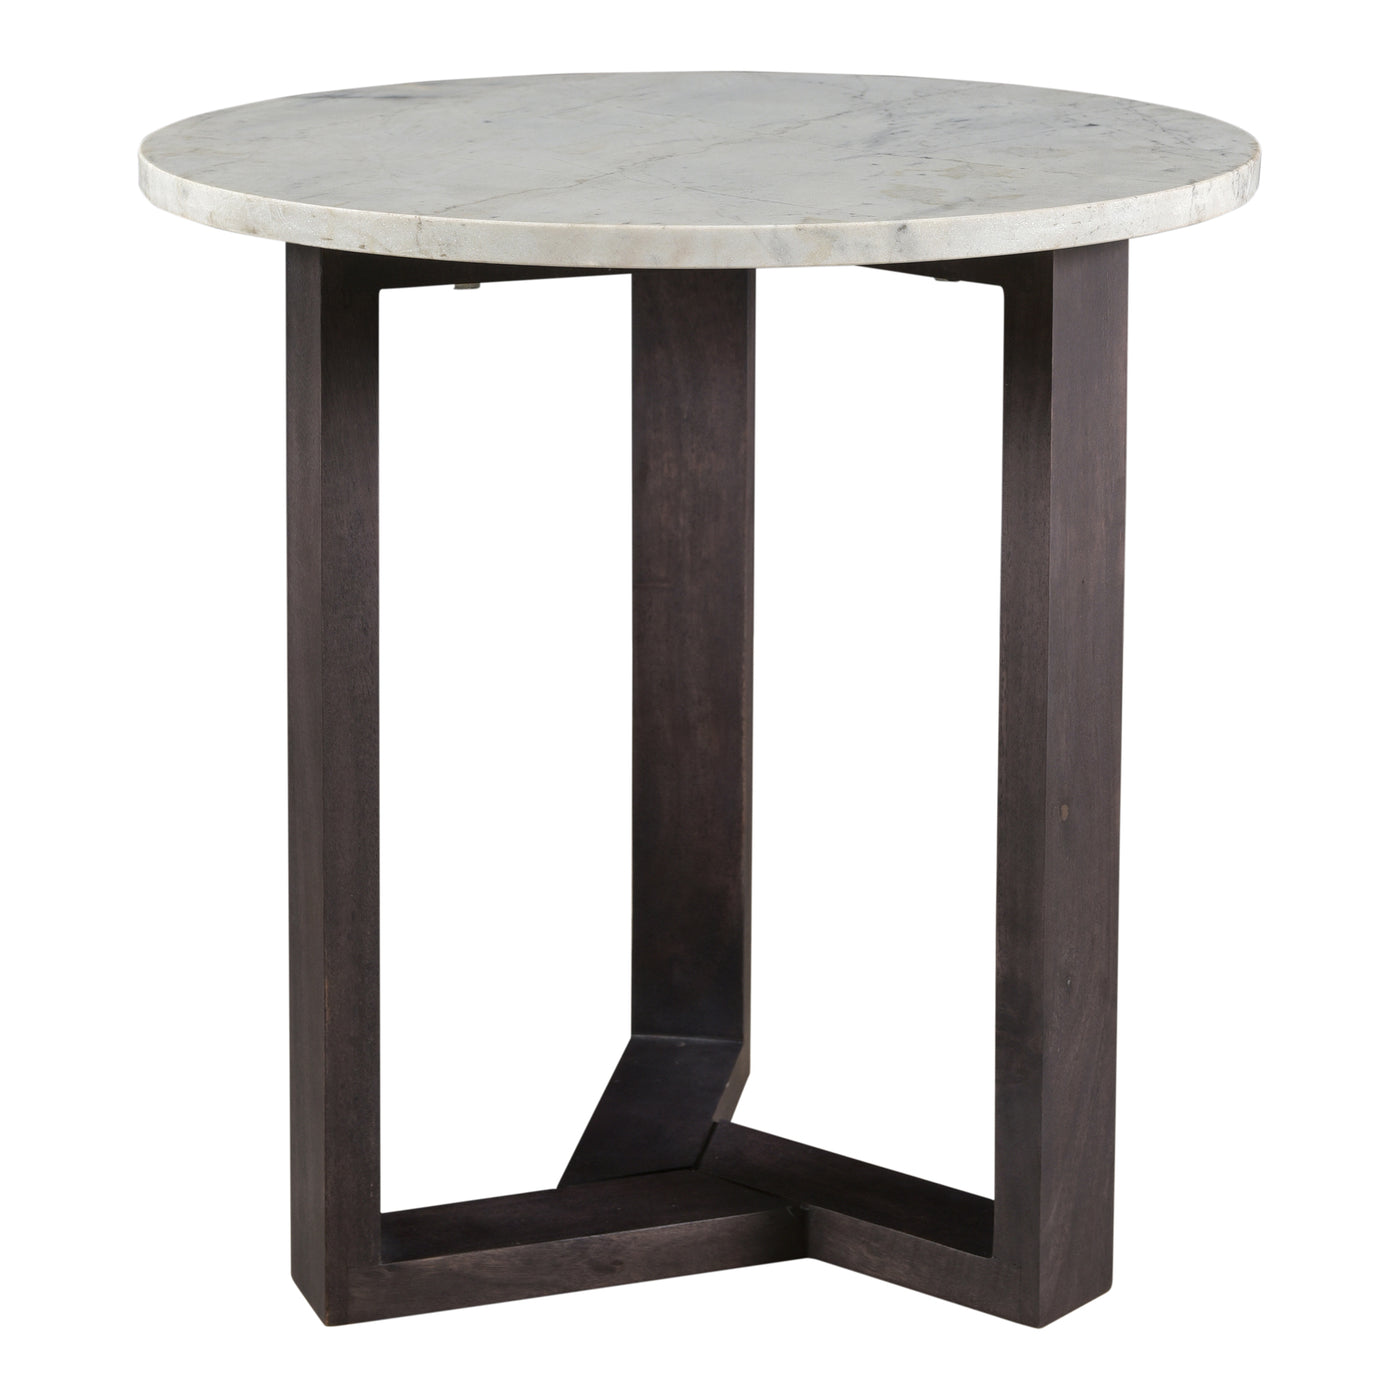 A classic staple that will transcend every dining situation. The Jinxx Side Table evokes modern simplicity with its geomet...